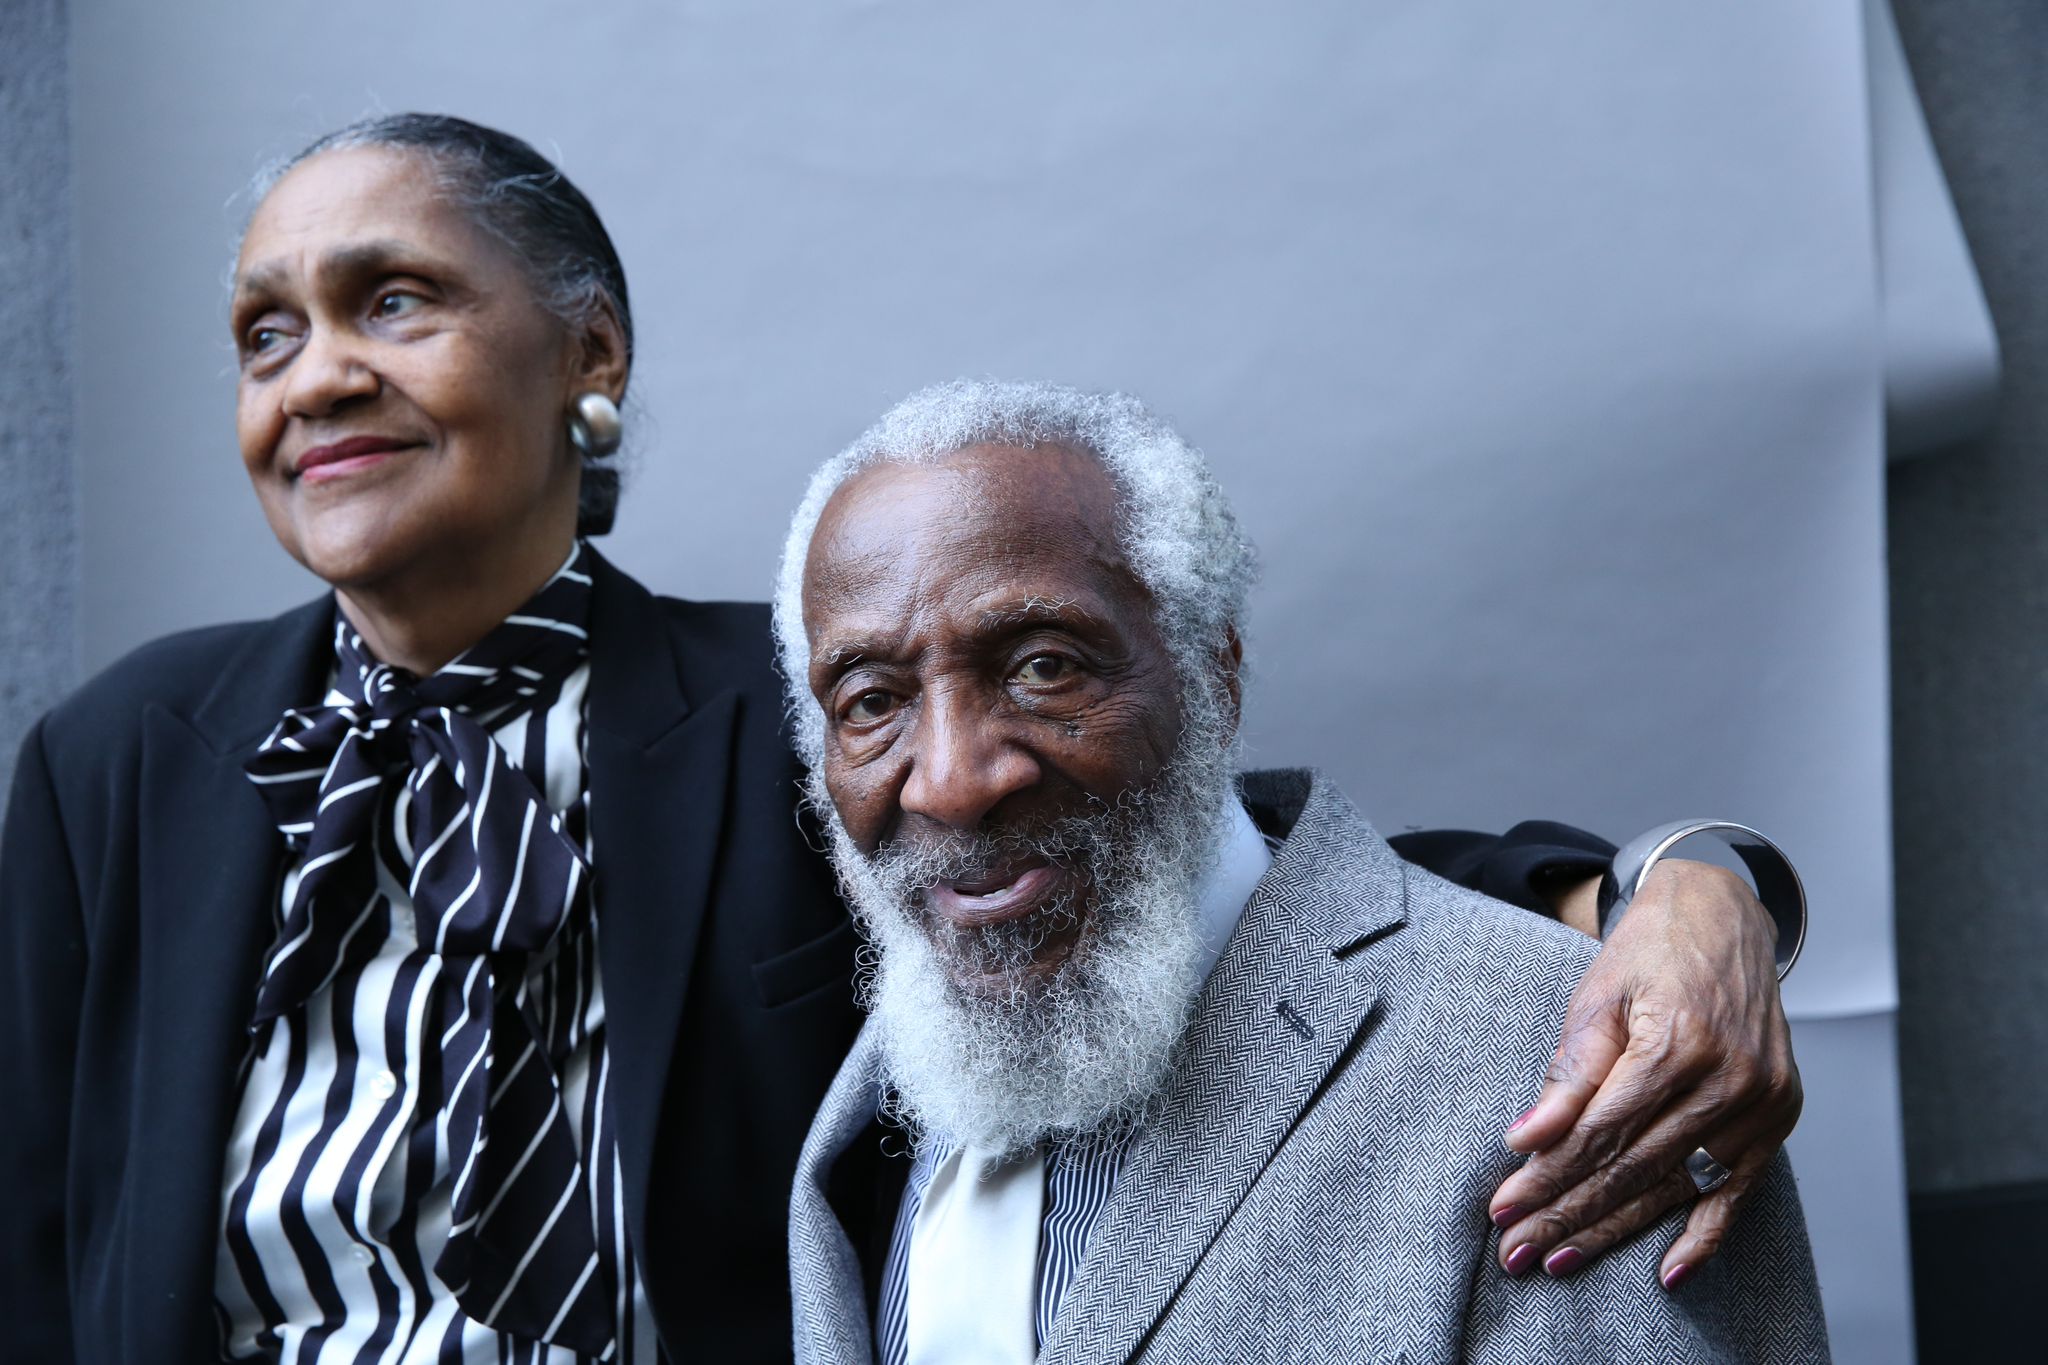 Dick gregory and his wife